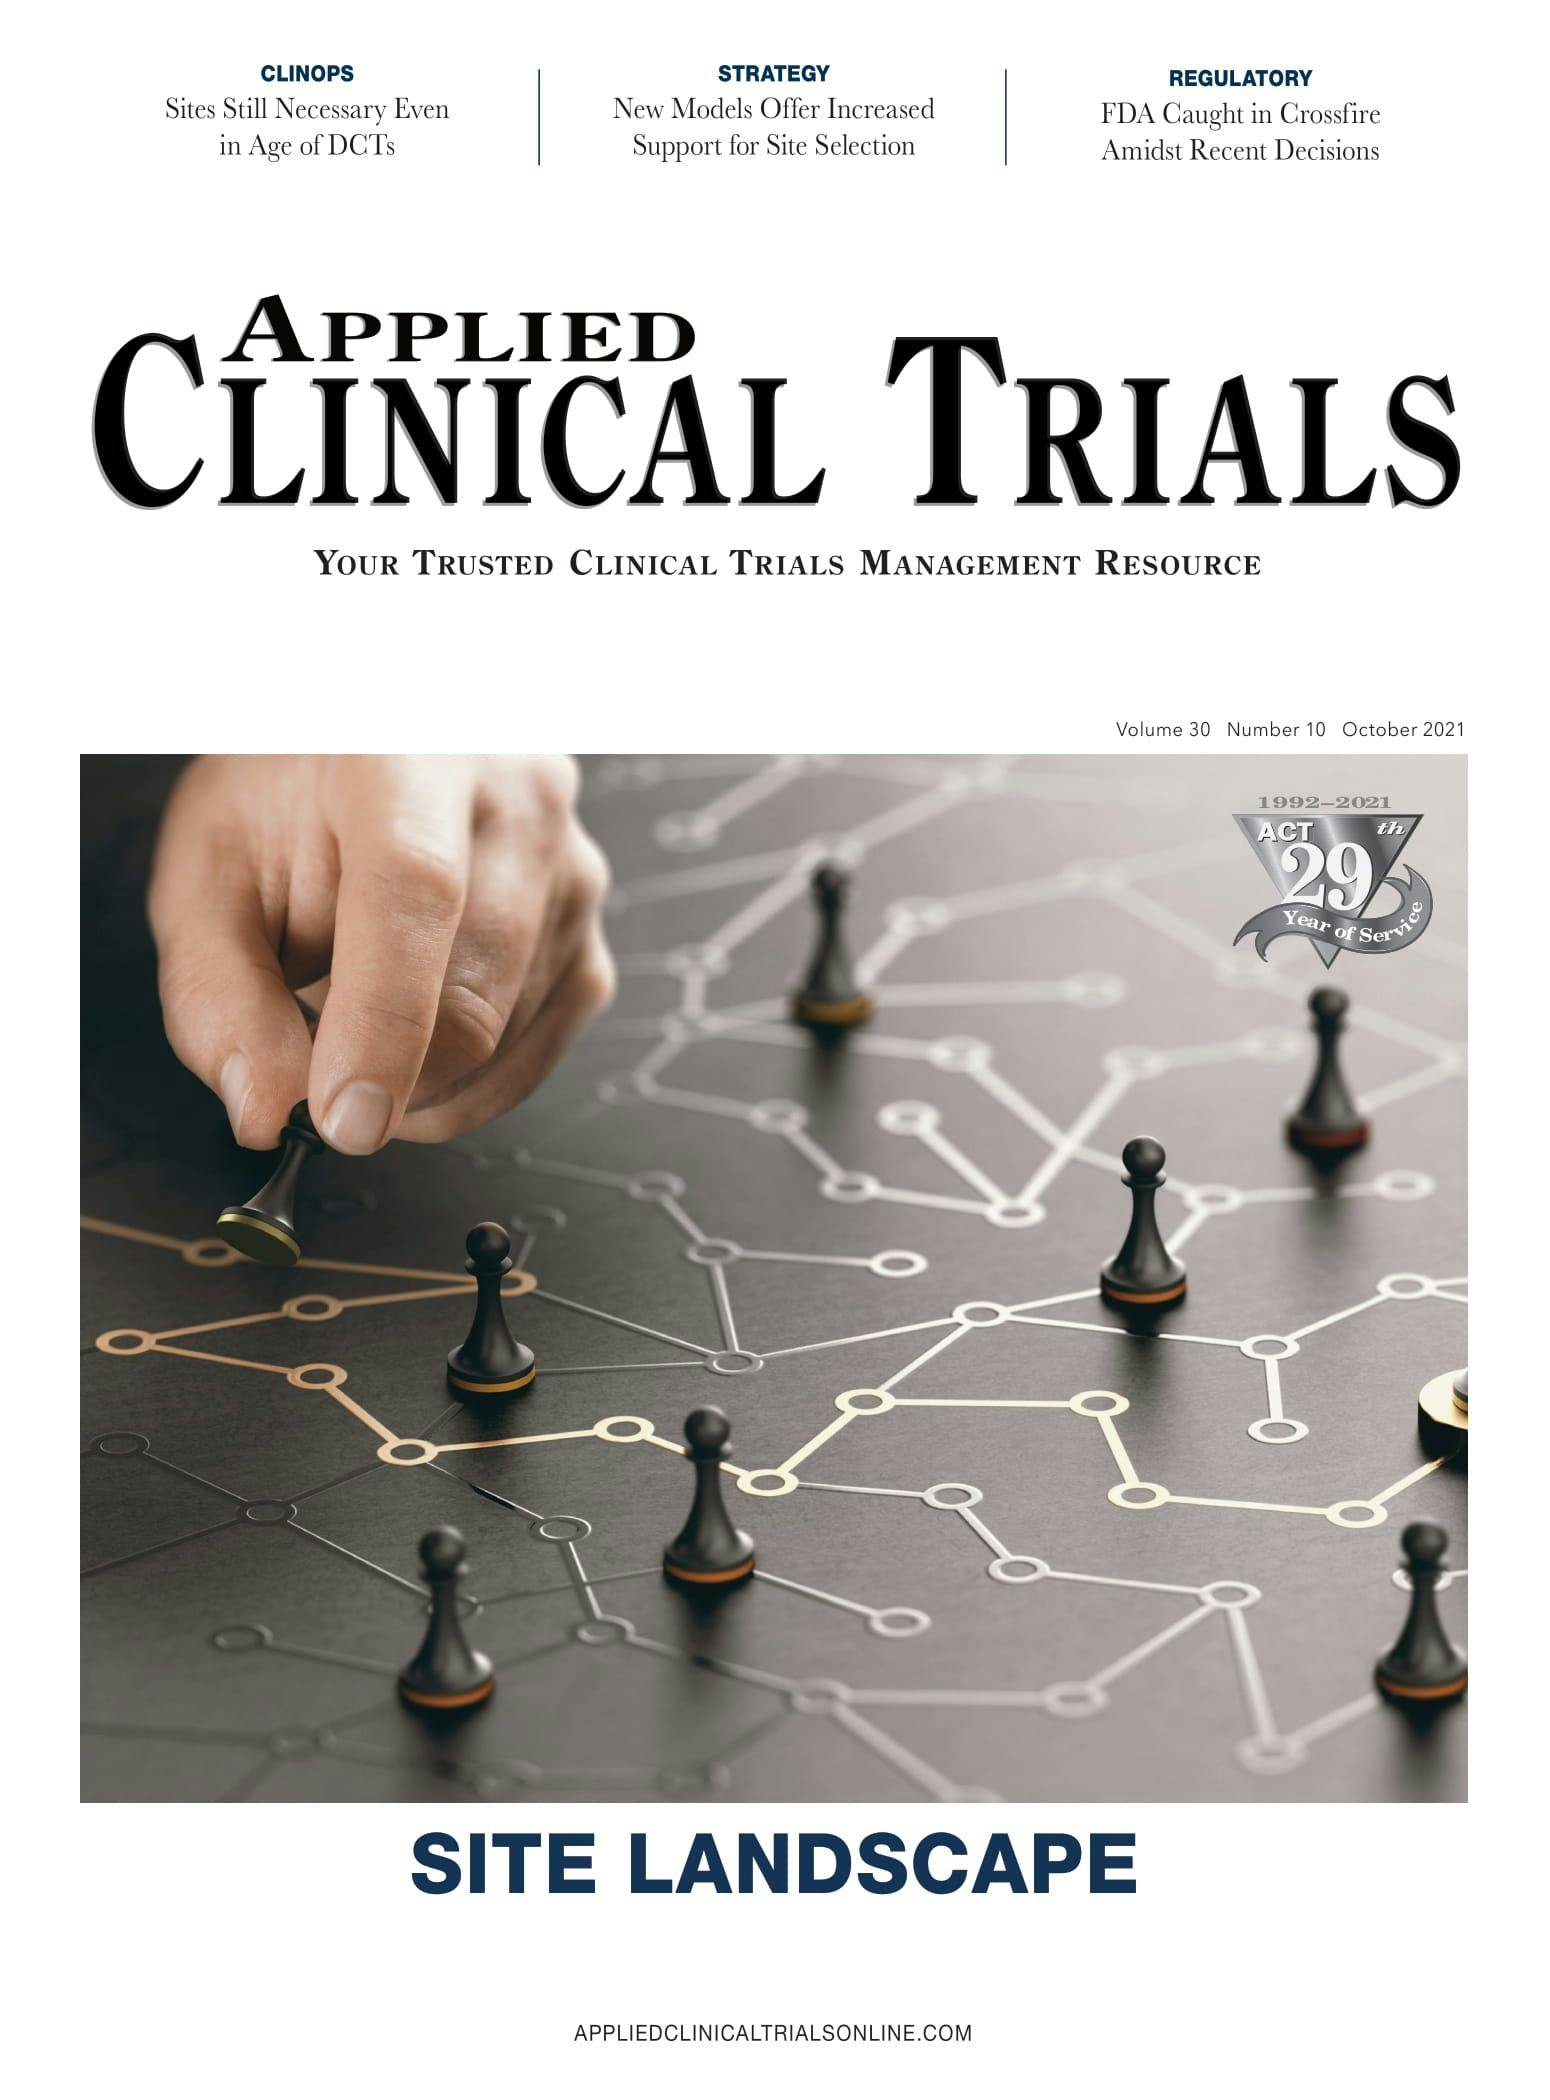 Applied Clinical Trials-10-01-2021